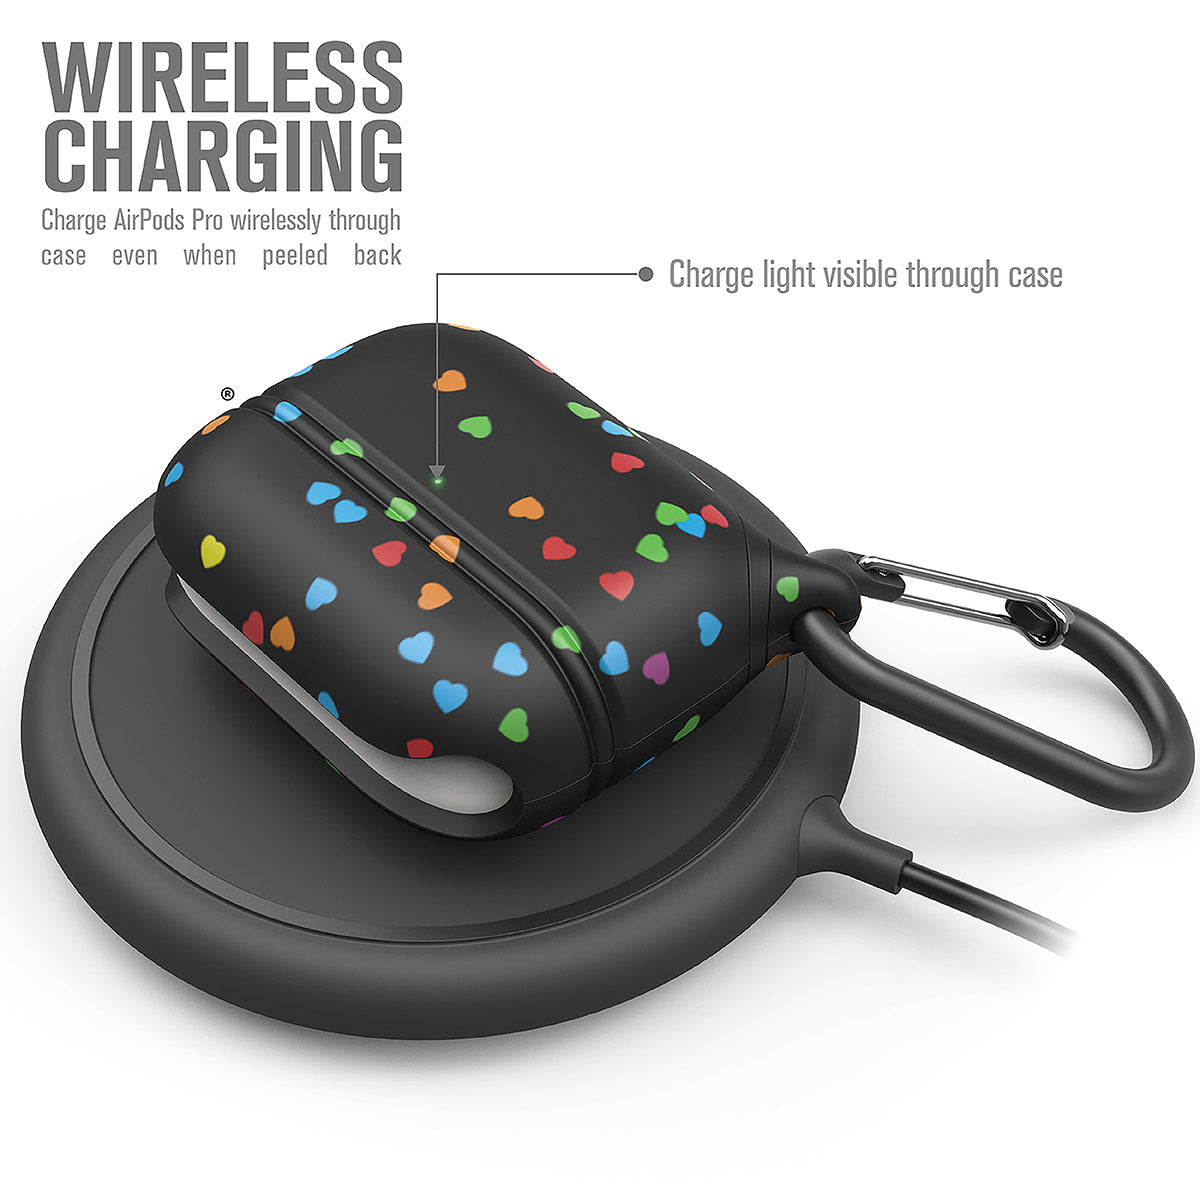 catalyst airpods pro gen 2 1 waterproof case carabiner special edition black with hearts on top of a wireless charger text reads wireless charging charge airpods pro wirelessly through case even when peeled back charge light visible through case